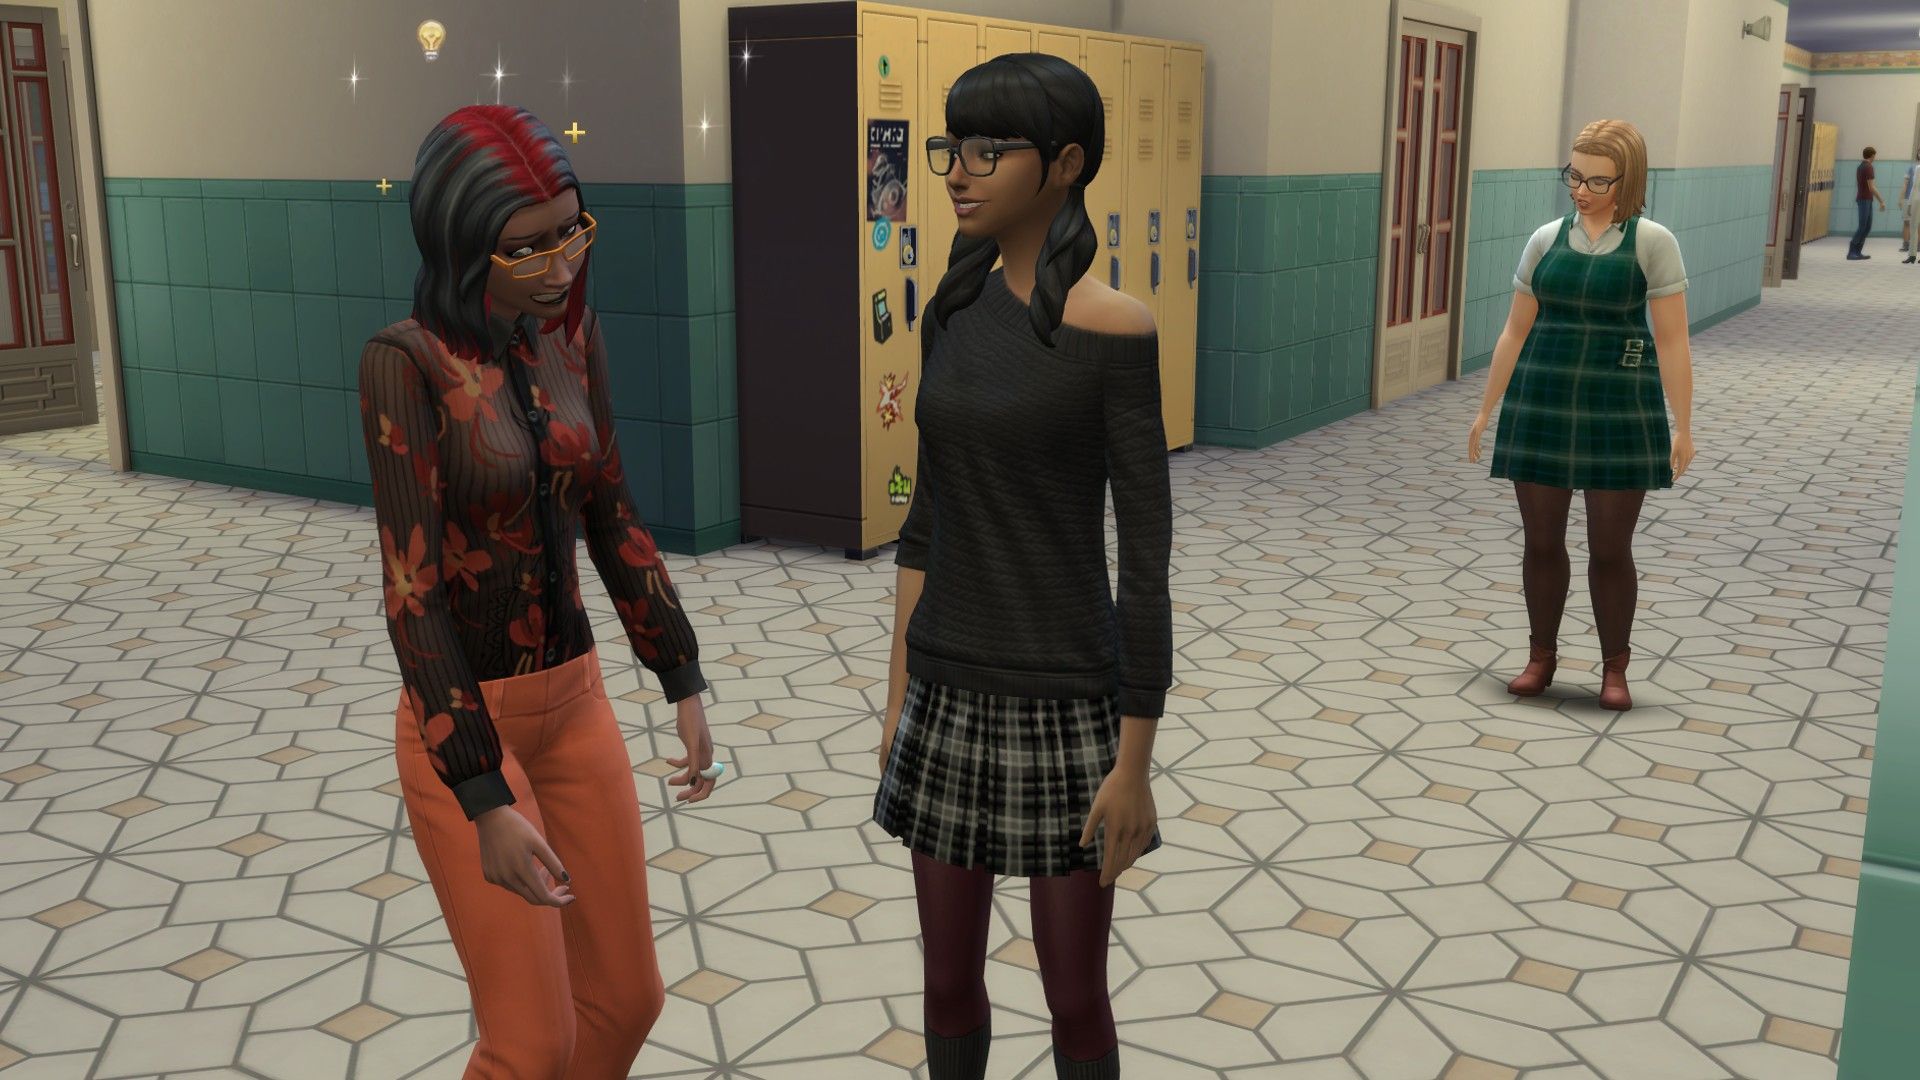 A Sim tries her luck at discovering her crush's romantic interests in The Sims 4